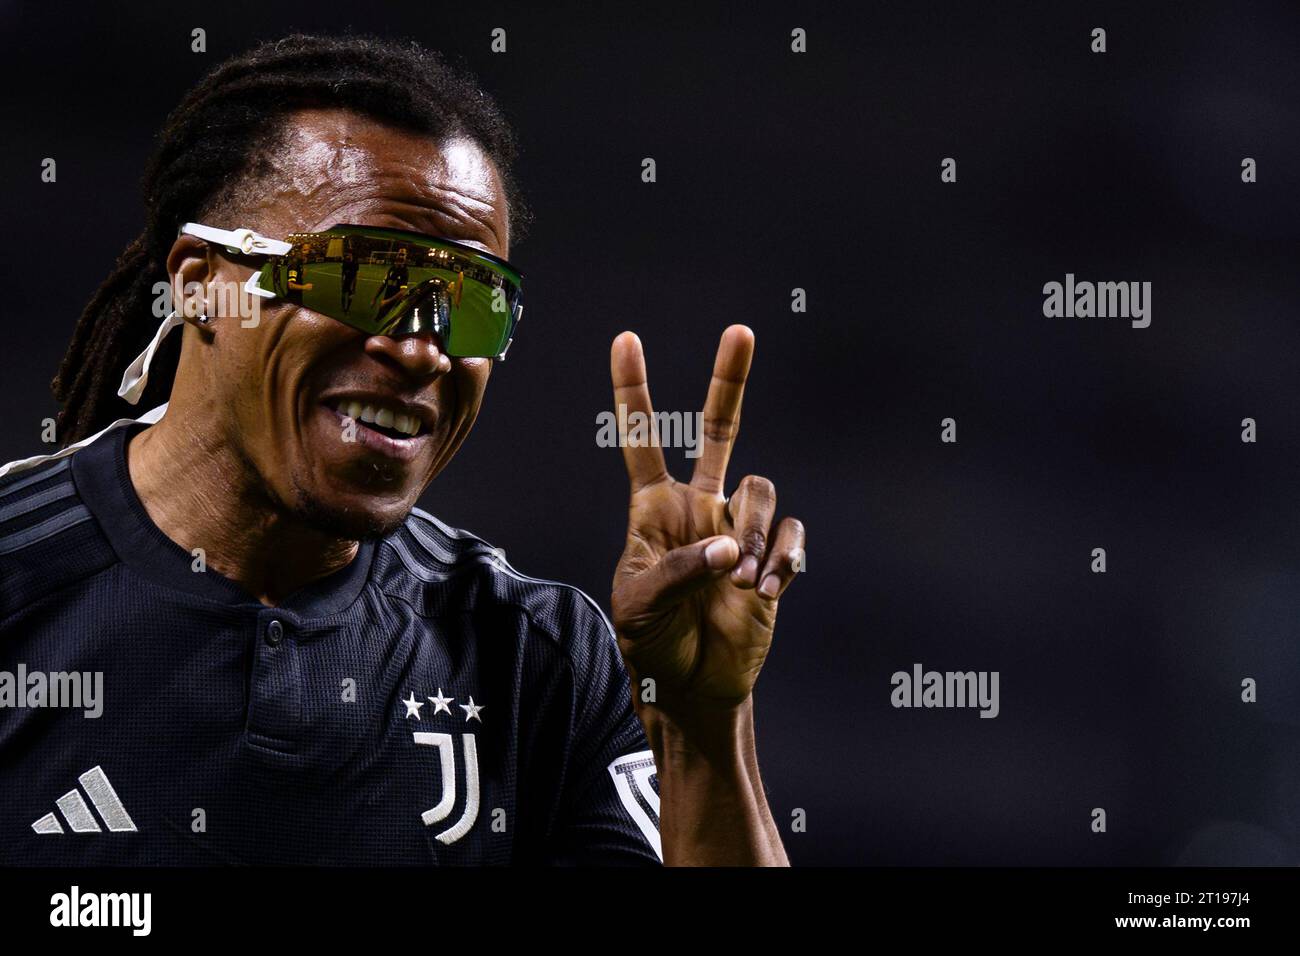 Edgar Davids gestures during the 'Together, a Black & White Show', an event organized by Juventus FC as part of the celebrations for the 100 years of the Agnelli family as president of the club. Stock Photo